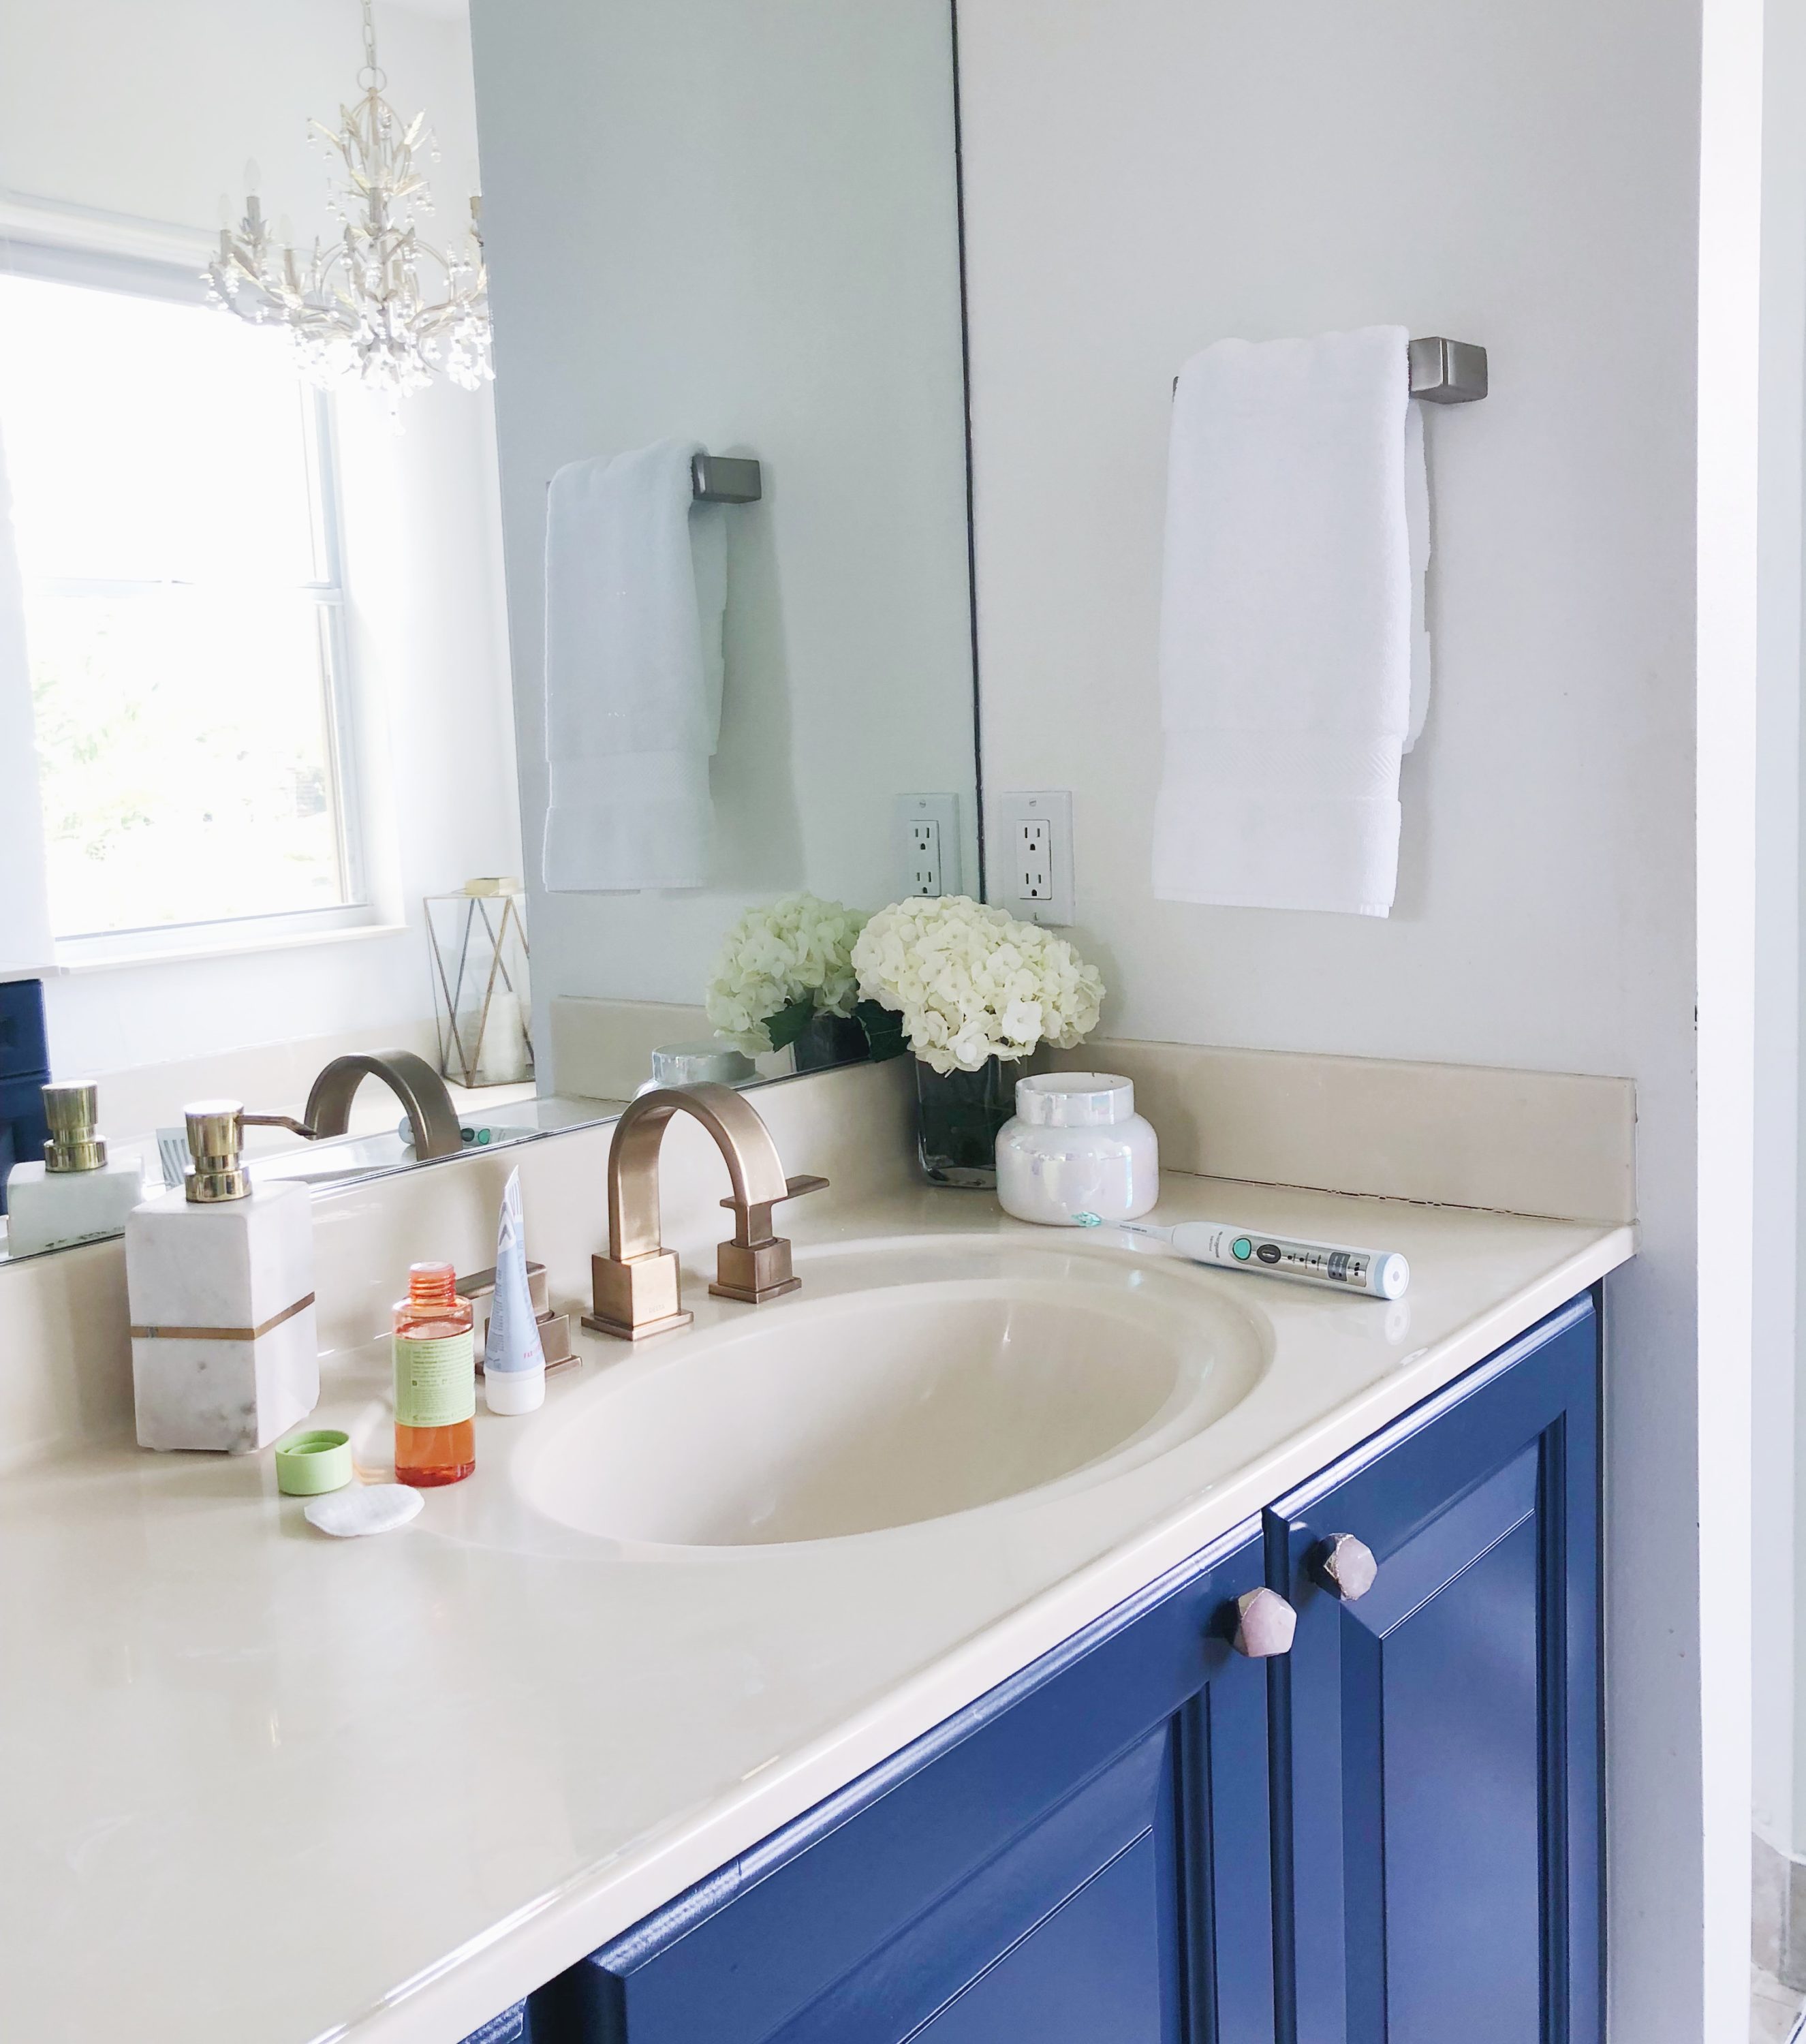 Master Bathroom with DIY blue cabinets and gold hardware | Avon | My Nighttime Routine featured by popular Florida life and style blogger The Modern Savvy